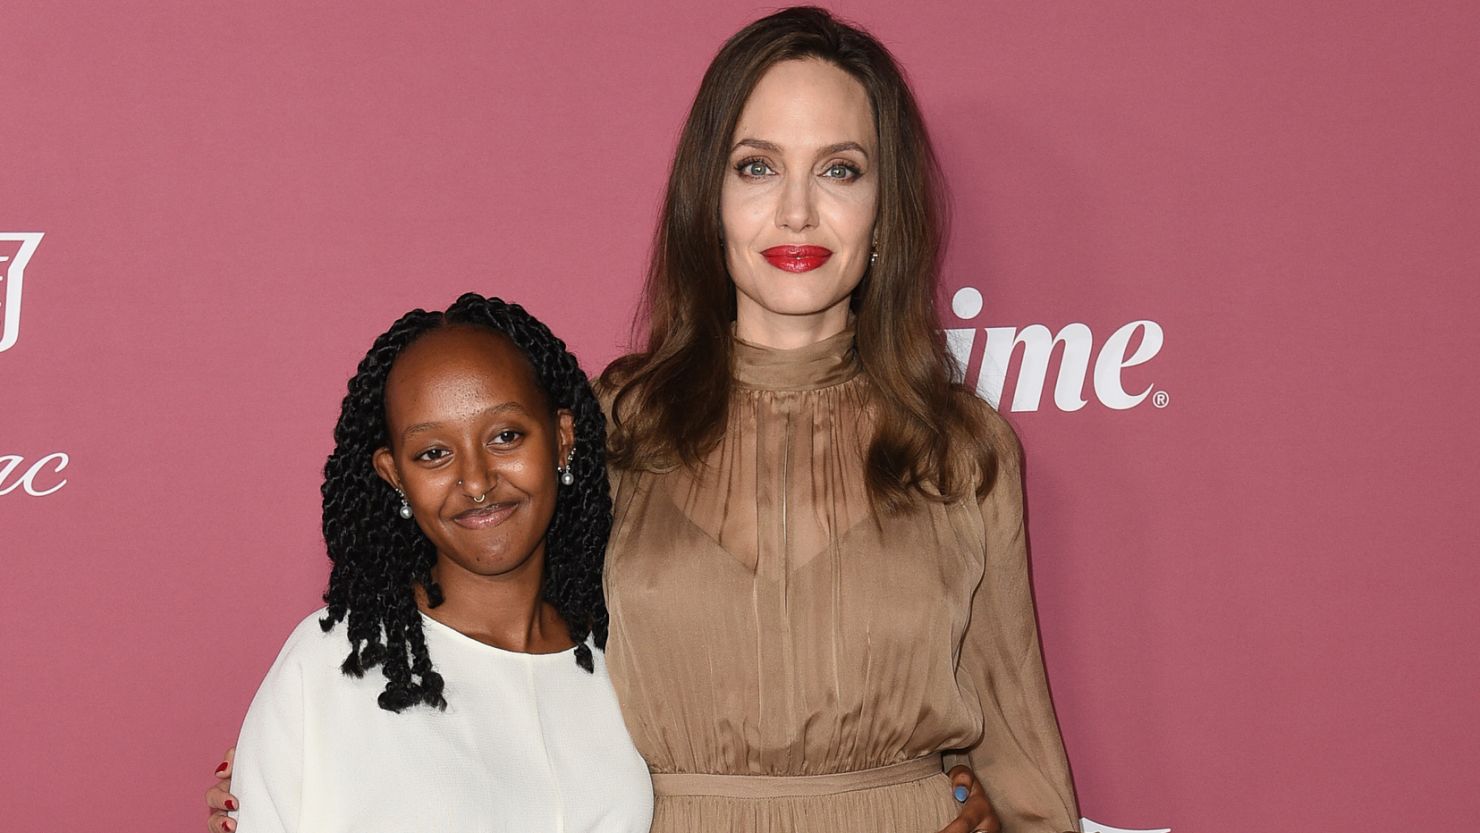 Zahara Jolie-Pitt, from left, and Angelina Jolie arrive at Variety's Power of Women: Los Angeles on Thursday, Sept. 30, 2021, at the Wallis Annenberg Center in Beverly Hills, Calif.